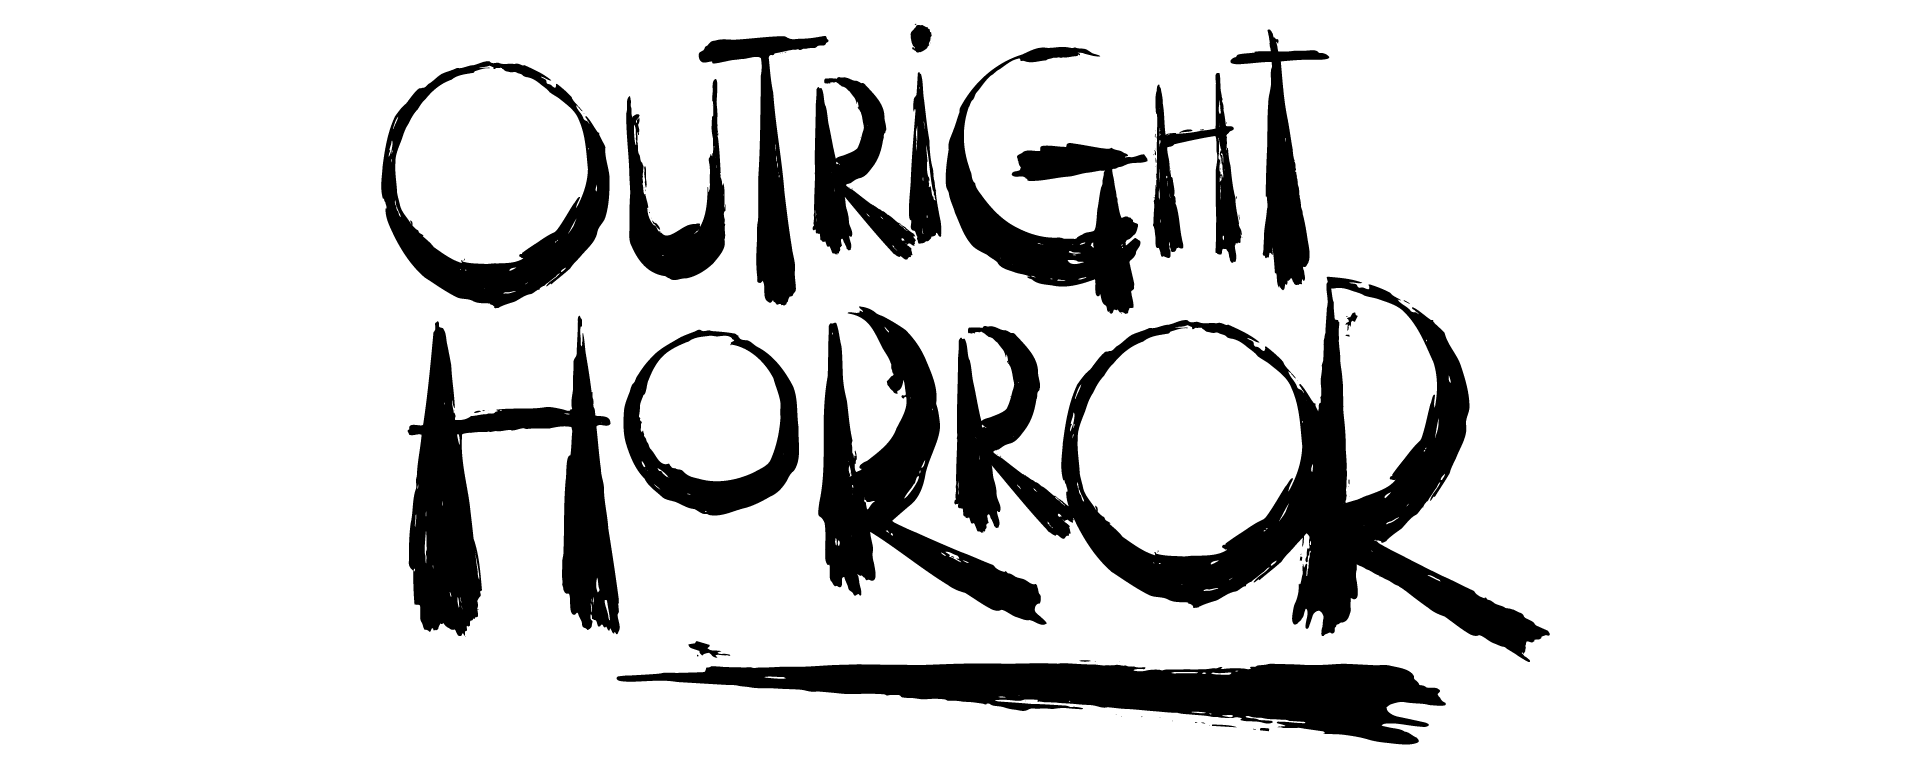 Outright Horror - A hand-Drawn Brush Font for Halloween by Wingsart Studio - Free Download